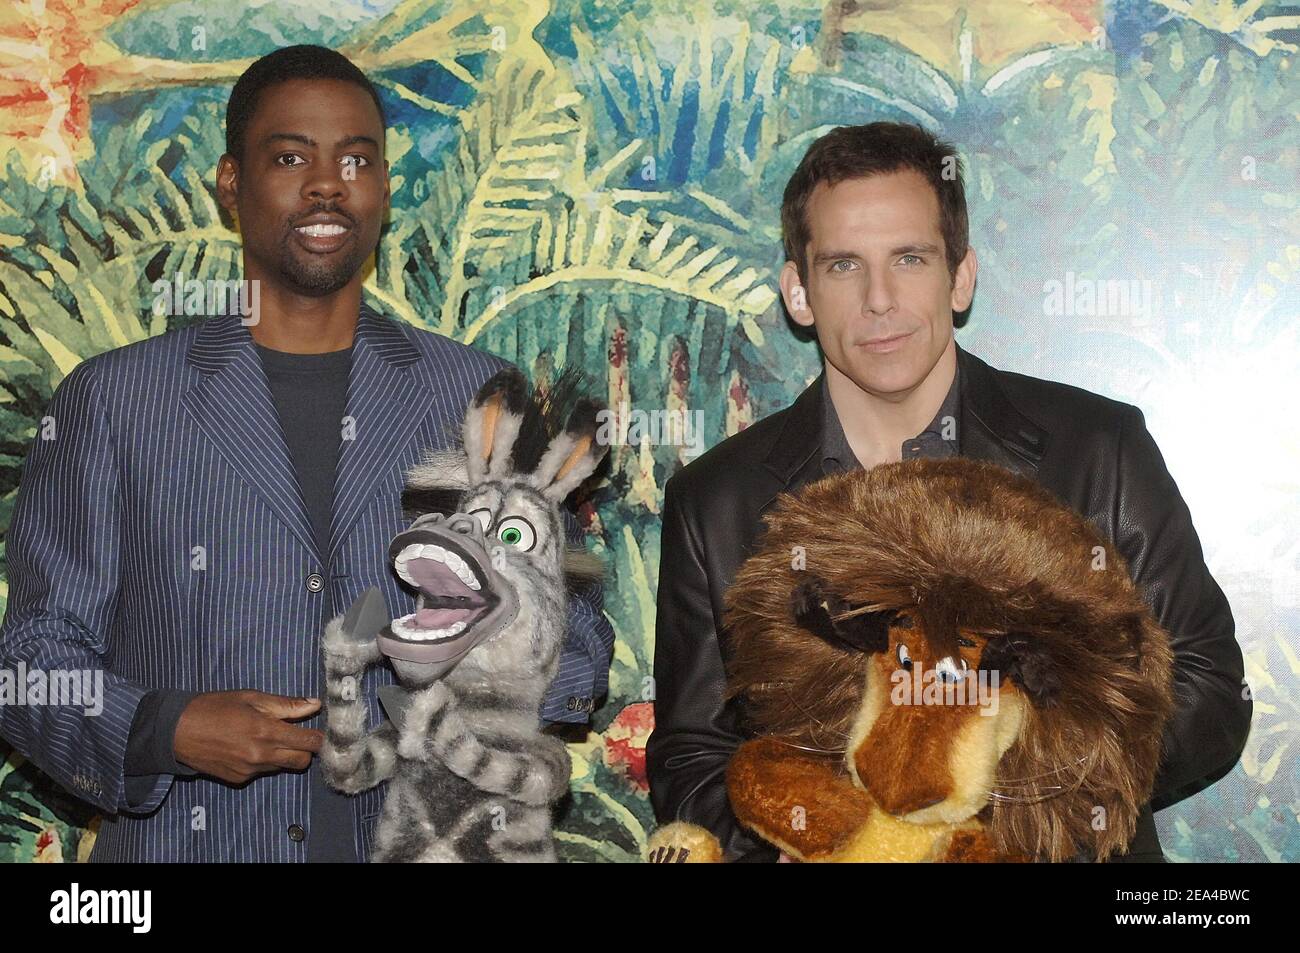 Us actors Chris Rock and Ben Stiller pose at the photocall for their film 'Madagascar' at George V Hotel in Paris, France, on June 13, 2005. Photo by Giancarlo Gorassini/ABACA Stock Photo